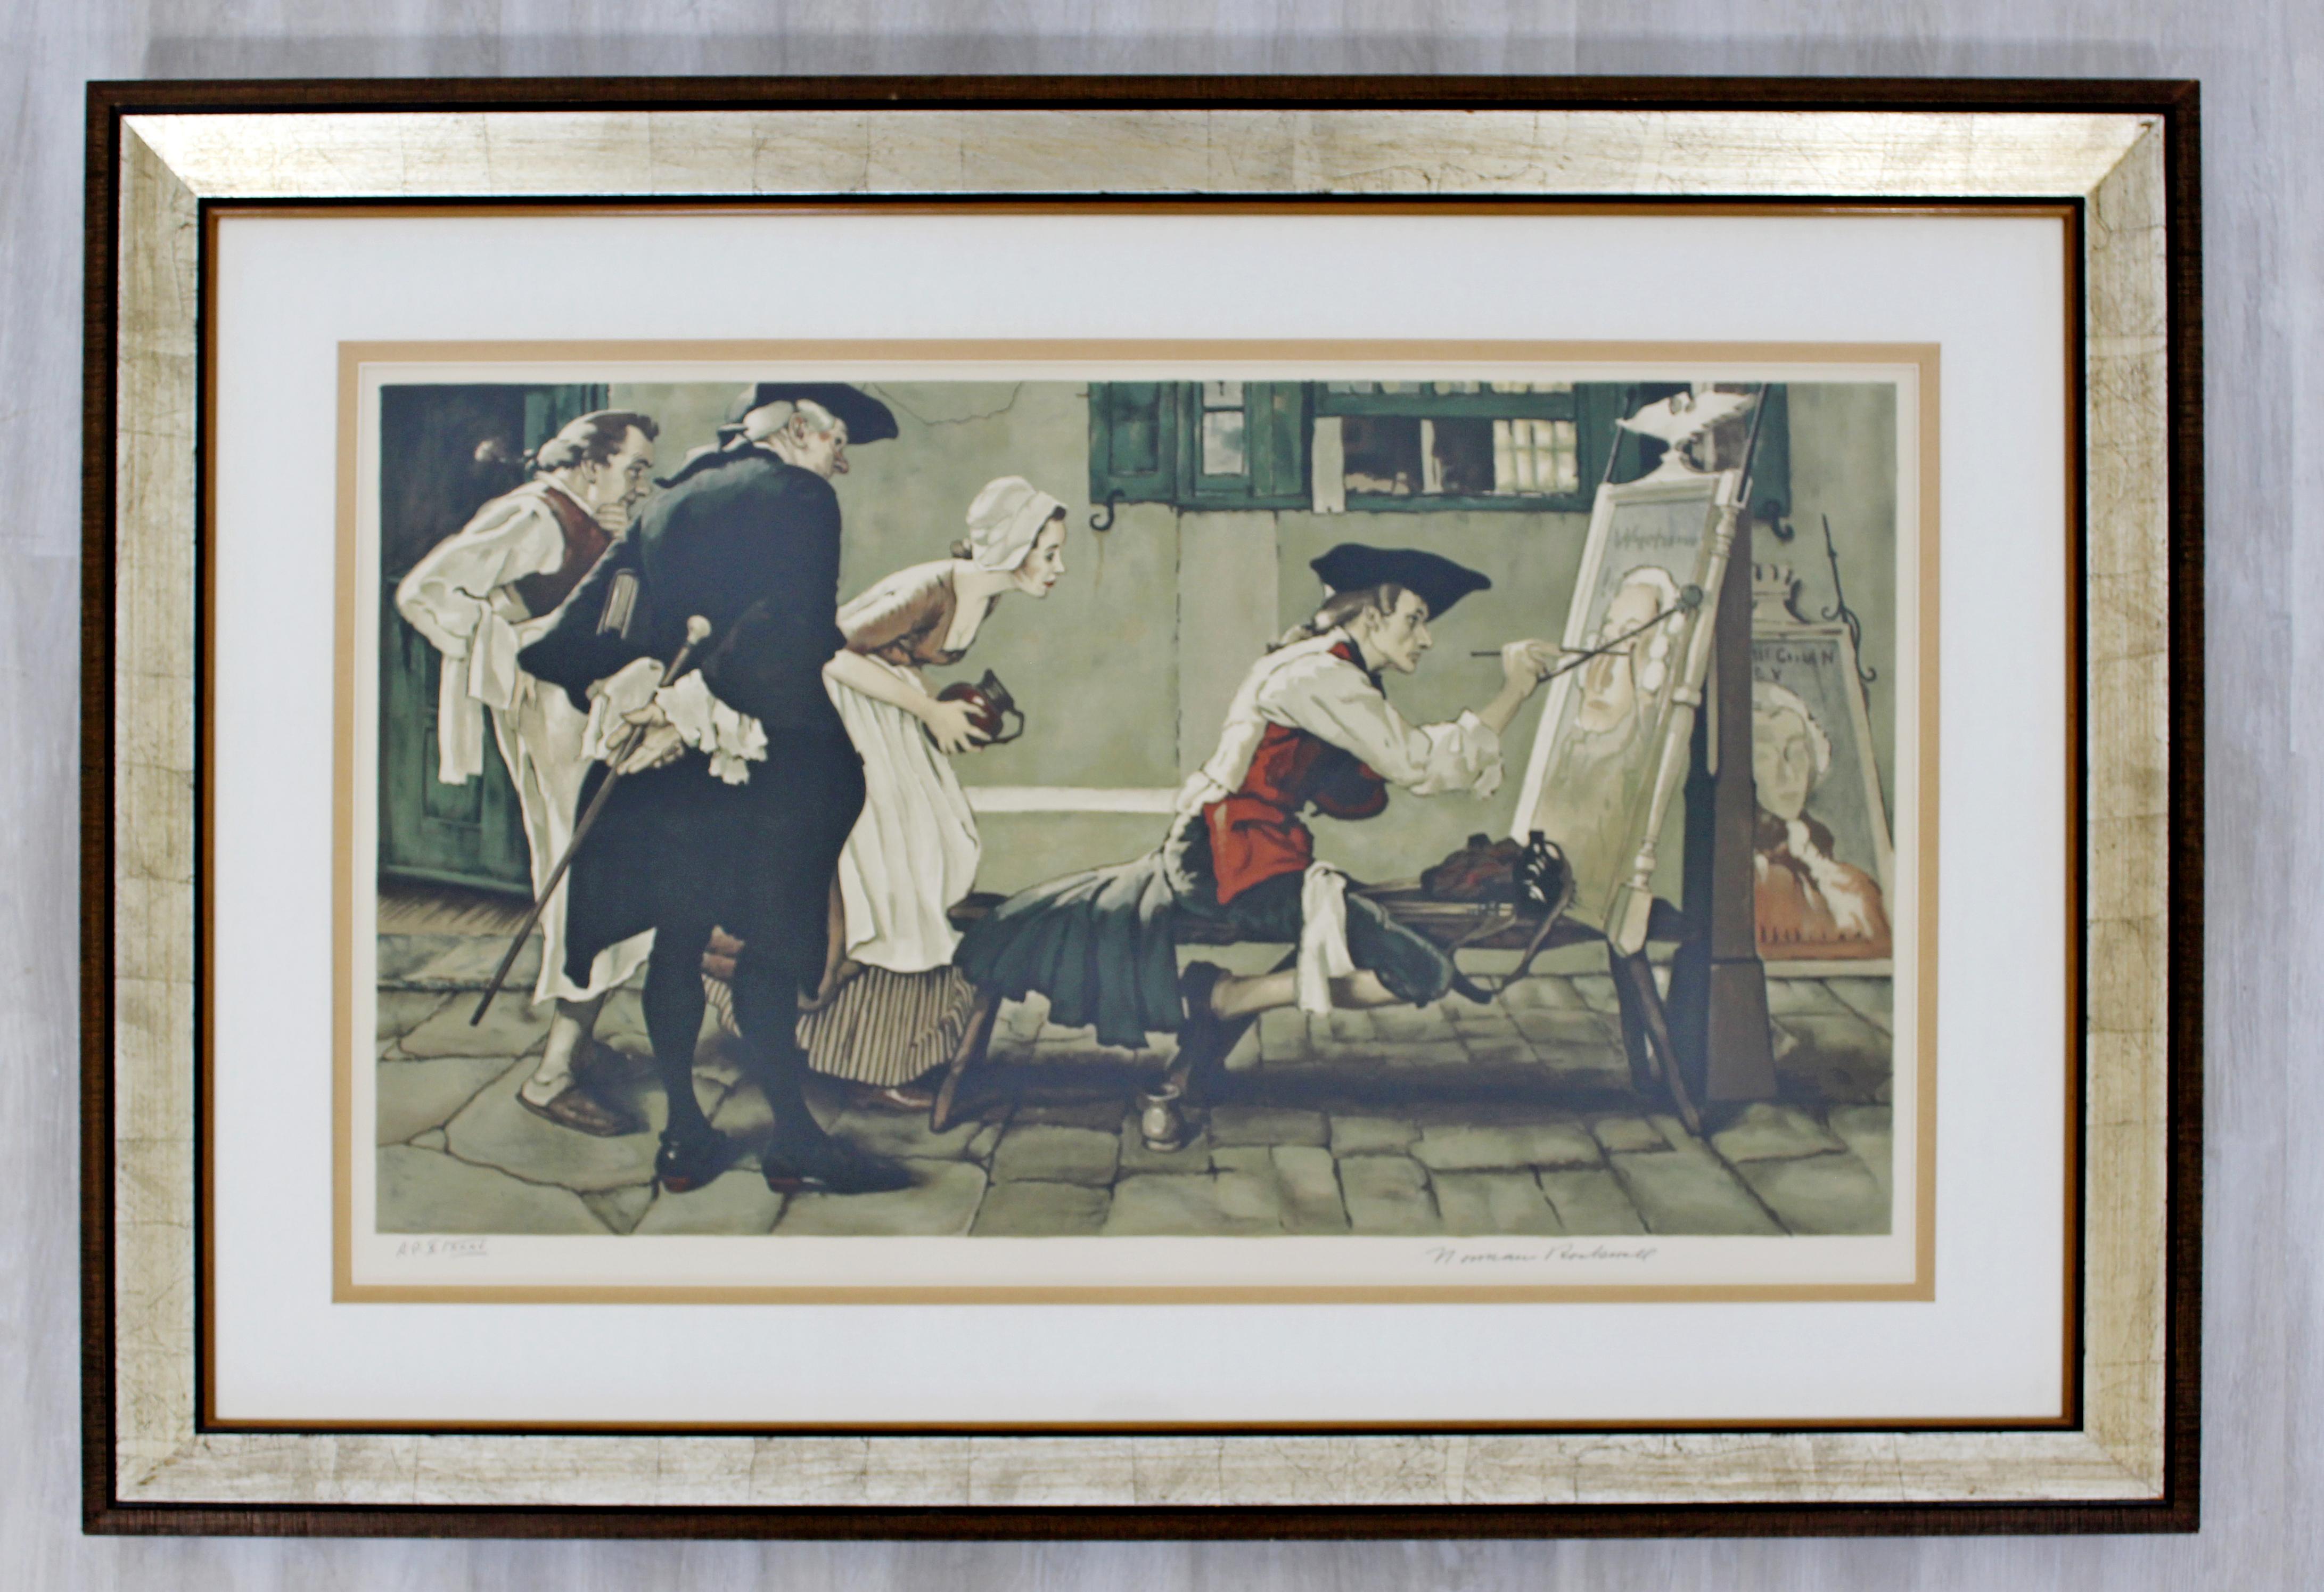 For your consideration is a framed, A.P. Lithograph of Norman Rockwell's 1936 modern illustration 